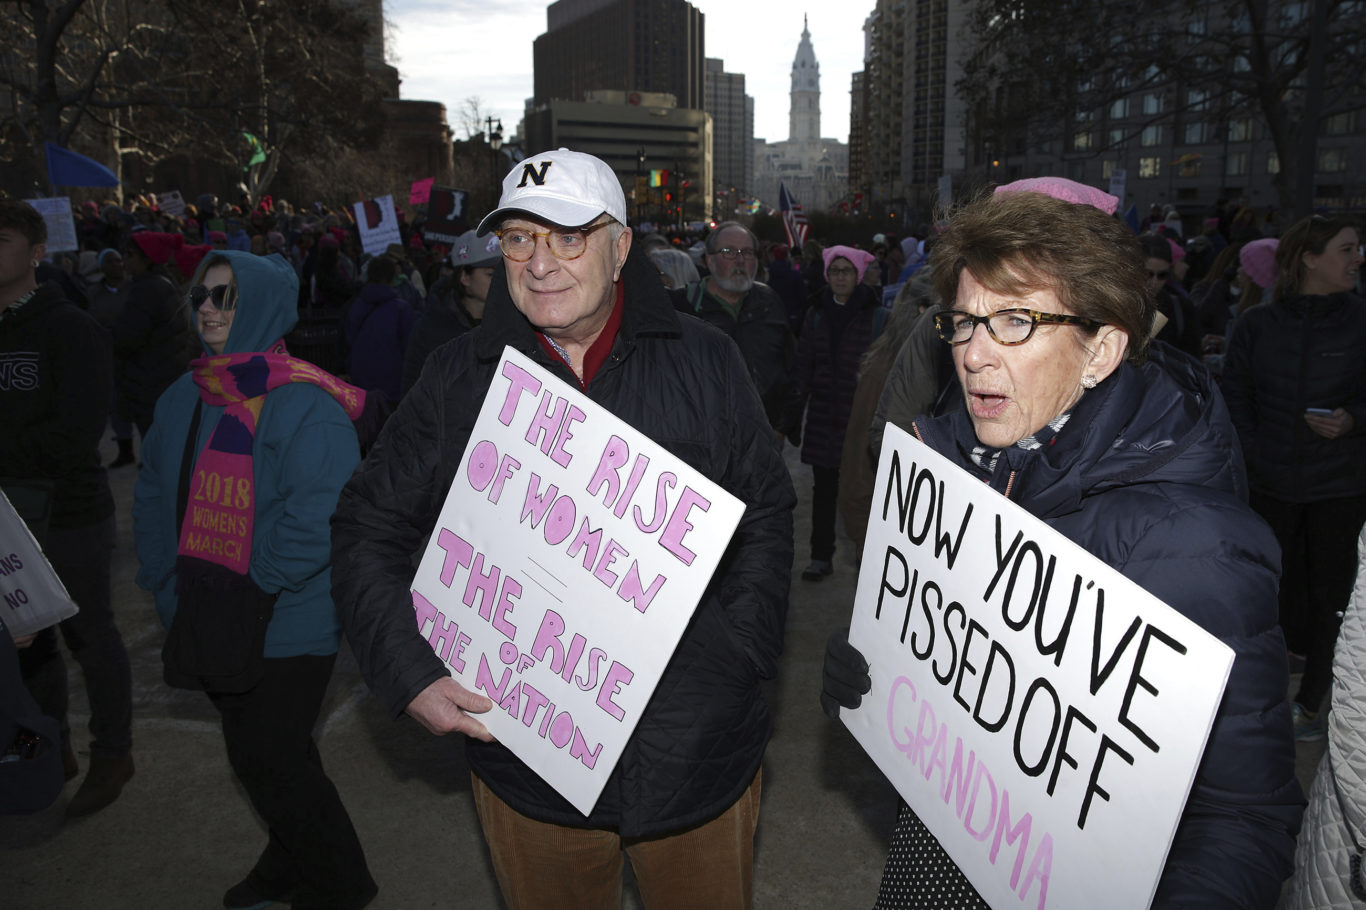 Jay and Peggy Chiappa at the start of the Women's March in Philadelphia (David Maialetti/AP)